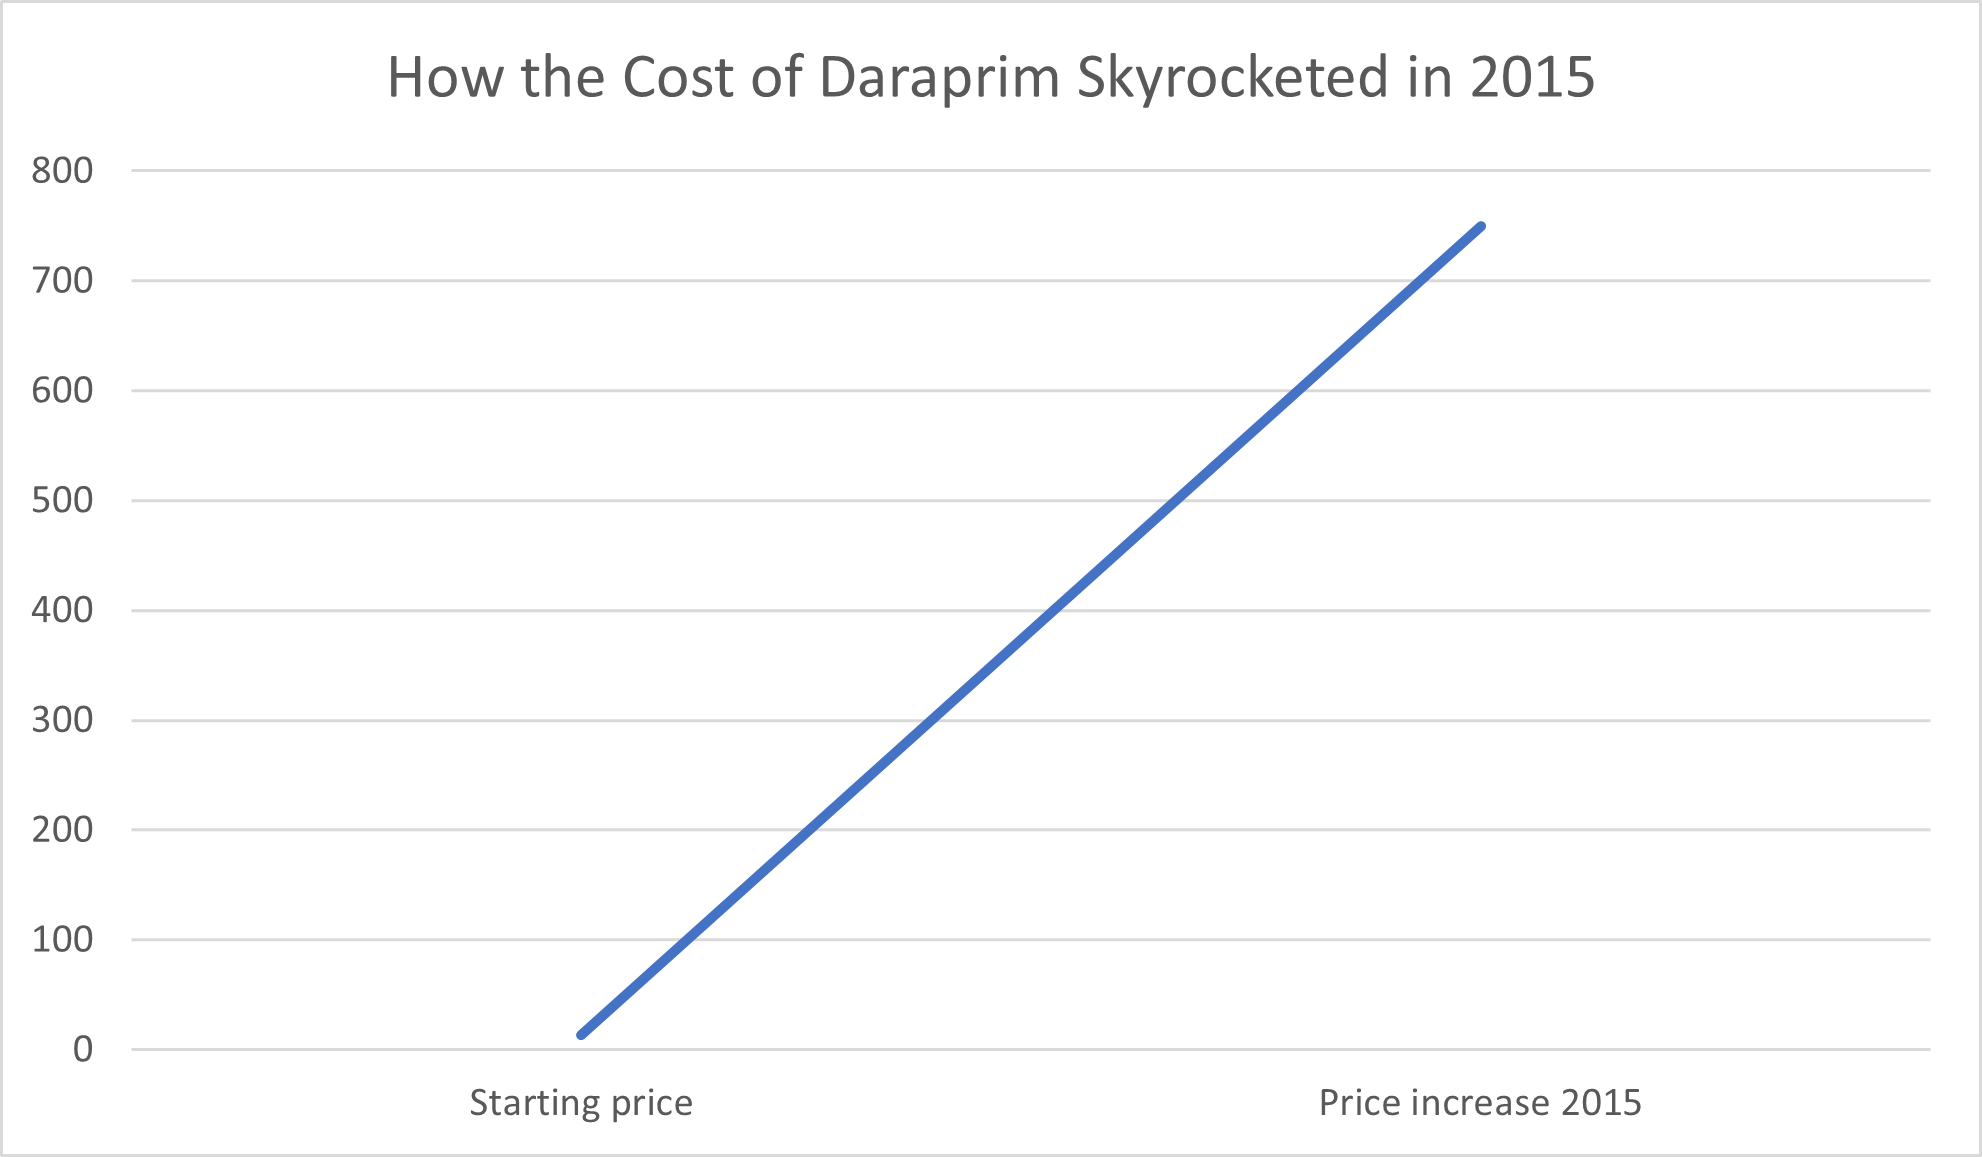 How the Cost of Daraprim Skyrocketed in 2015